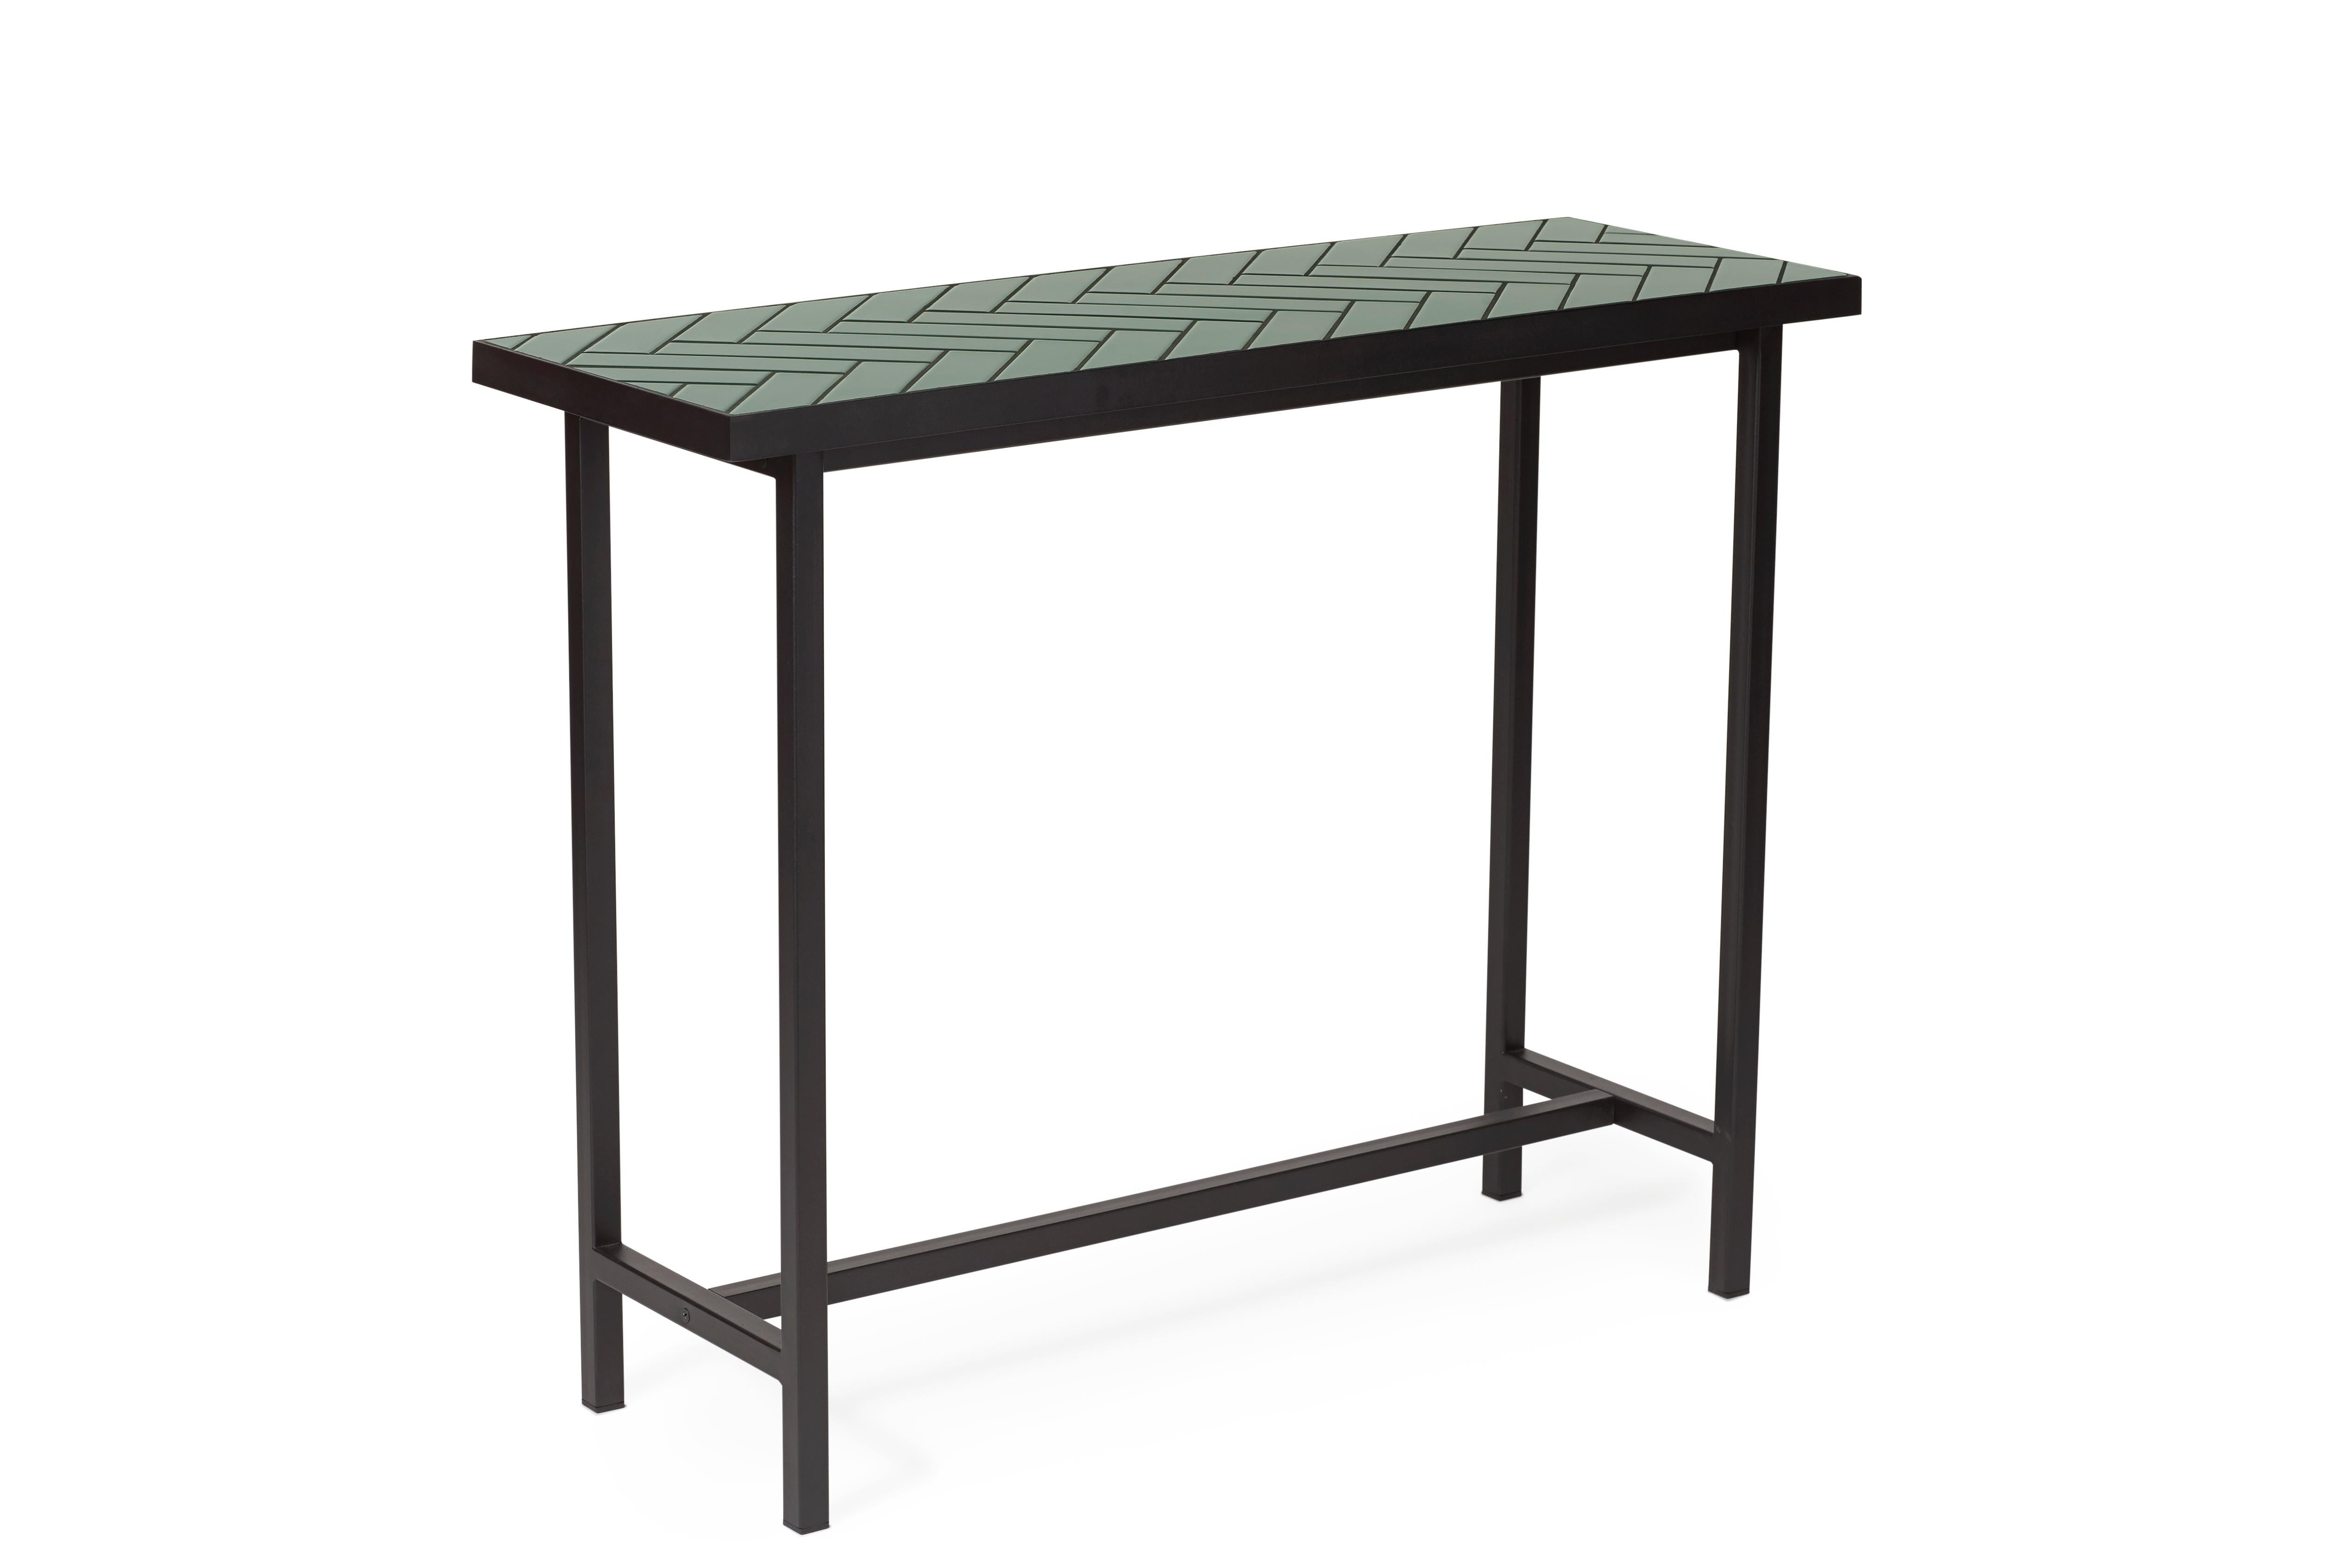 For Sale: Green (Forest green) Herringbone Console Table, by Charlotte Høncke from Warm Nordic 2